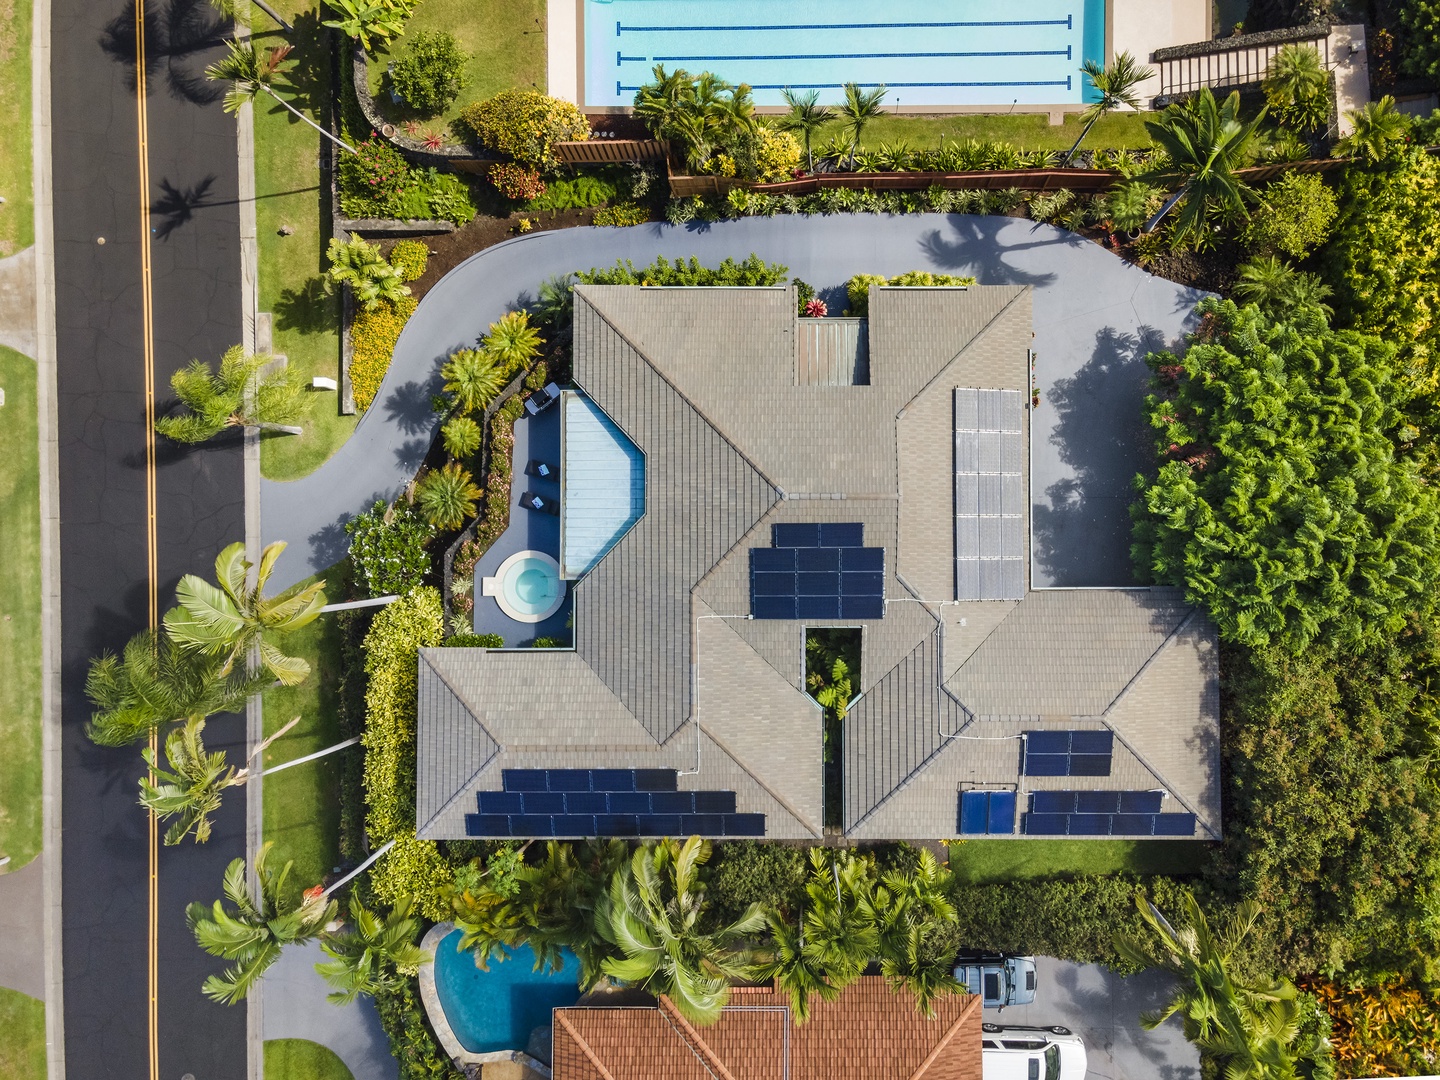 Kailua Kona Vacation Rentals, Pineapple House - Aerial photo of the home showing off the solar panels